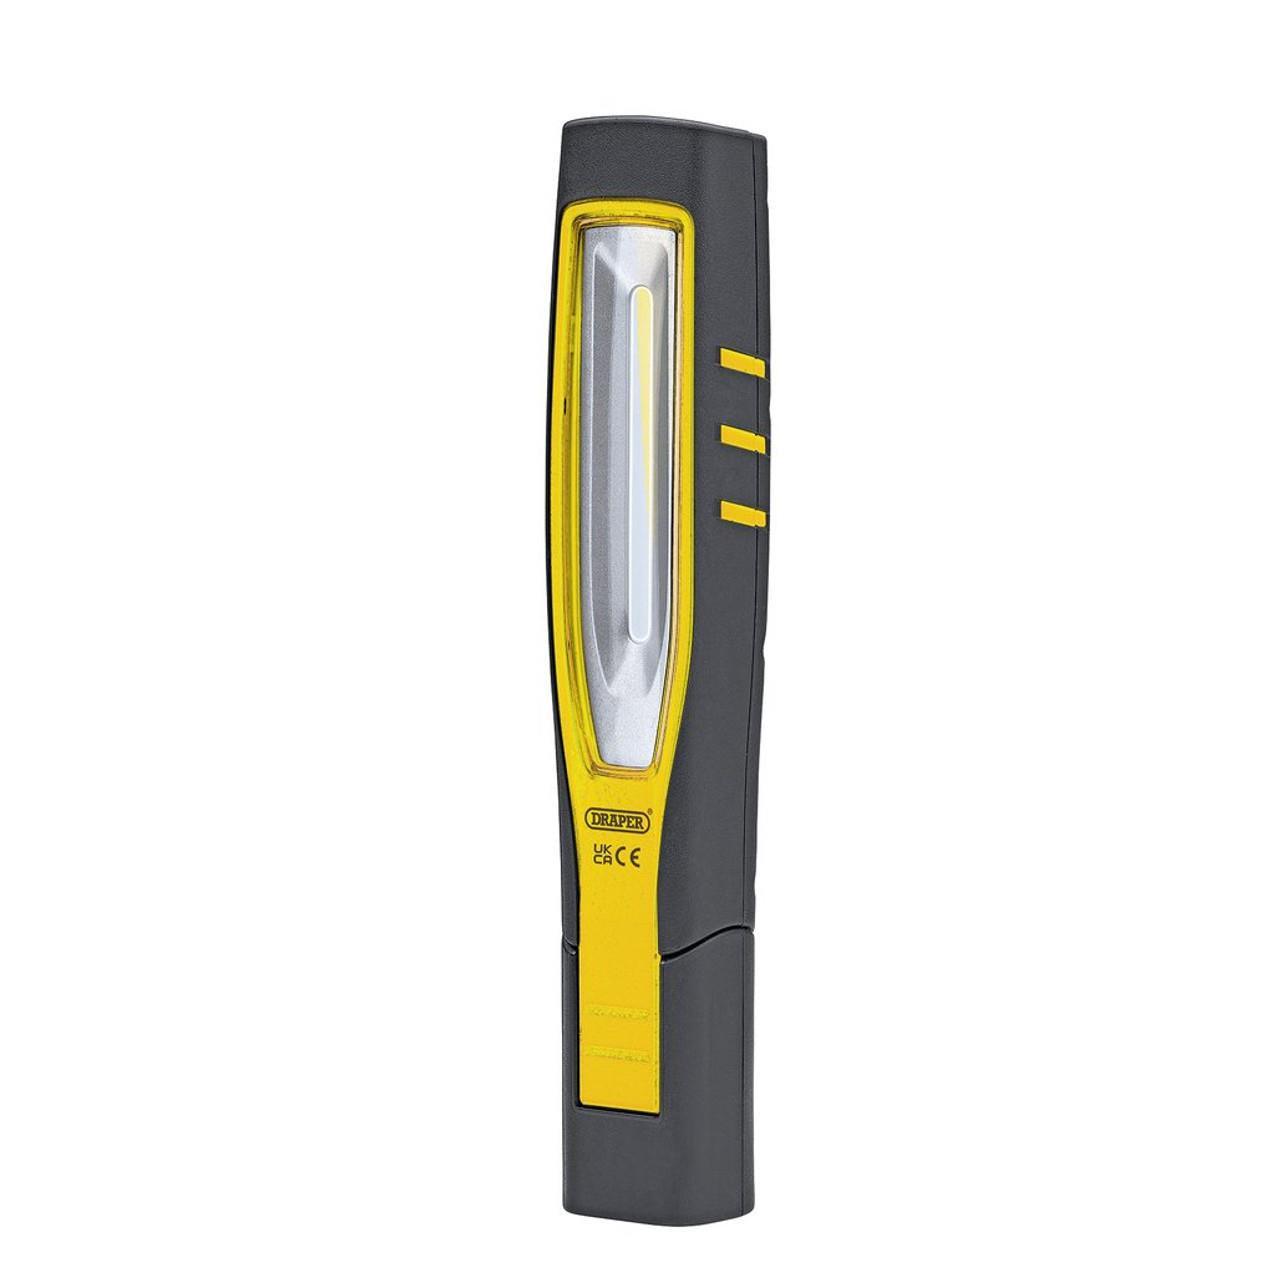 Draper COB/SMD LED Rechargeable Inspection Lamp, 7W, 700 Lumens, Yellow 11762 - Tools 2U Direct SW